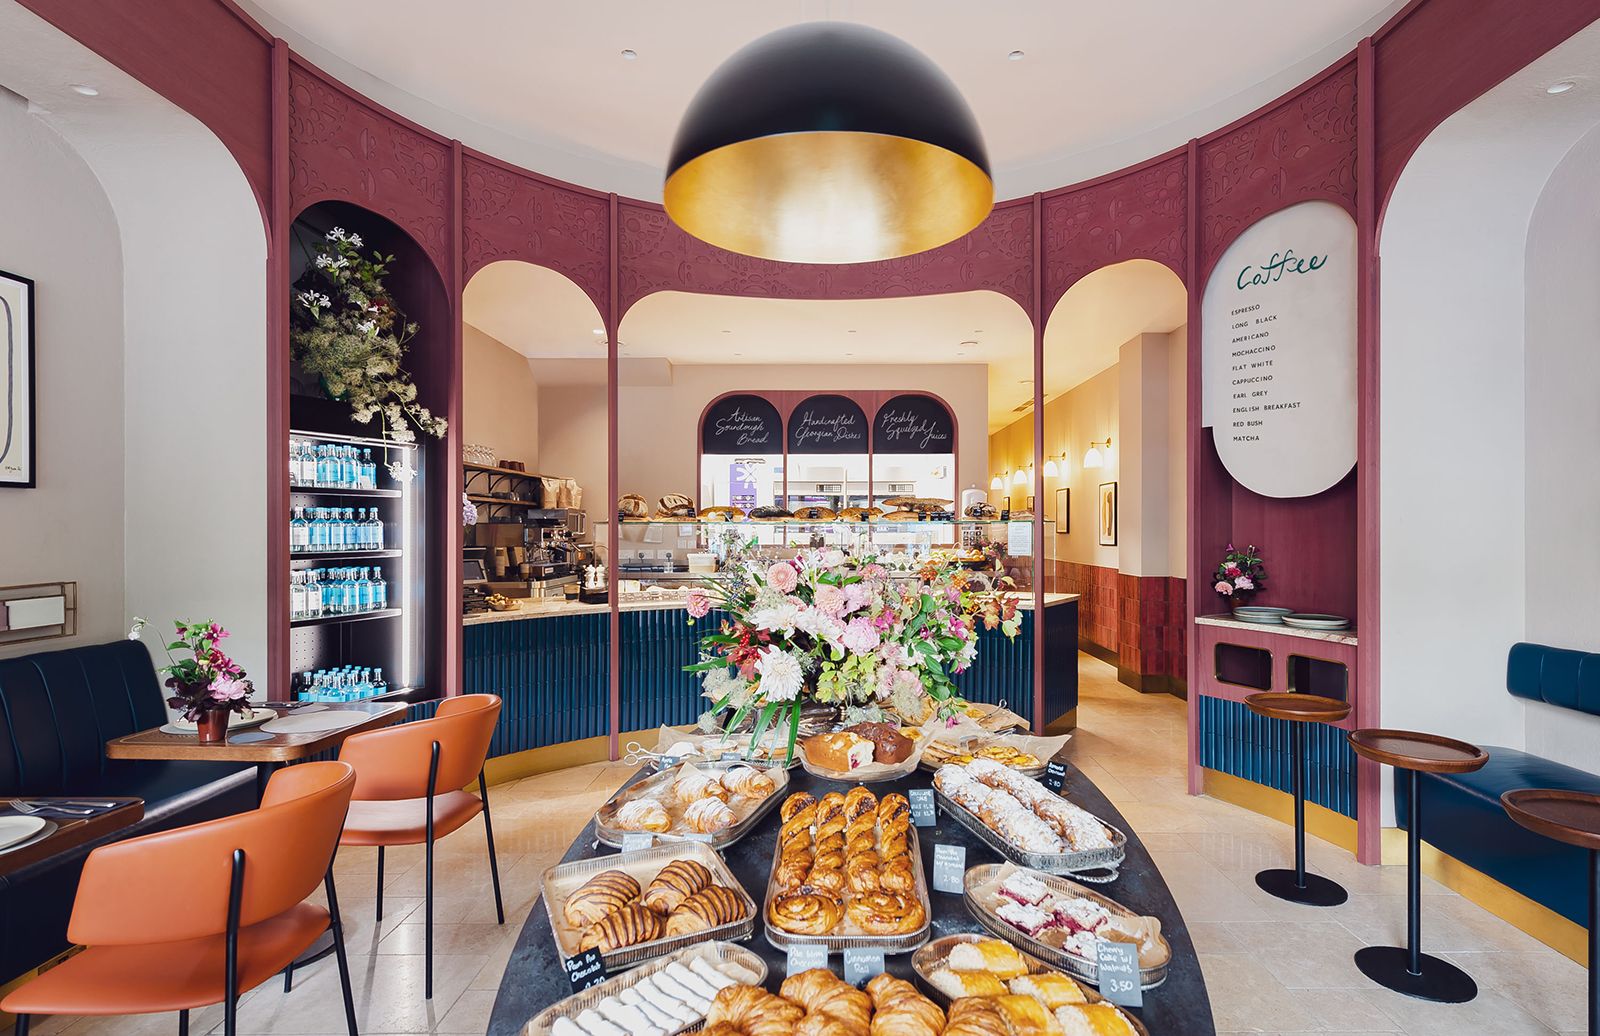 This bakery will make you feel like you're in a Wes Anderson movie